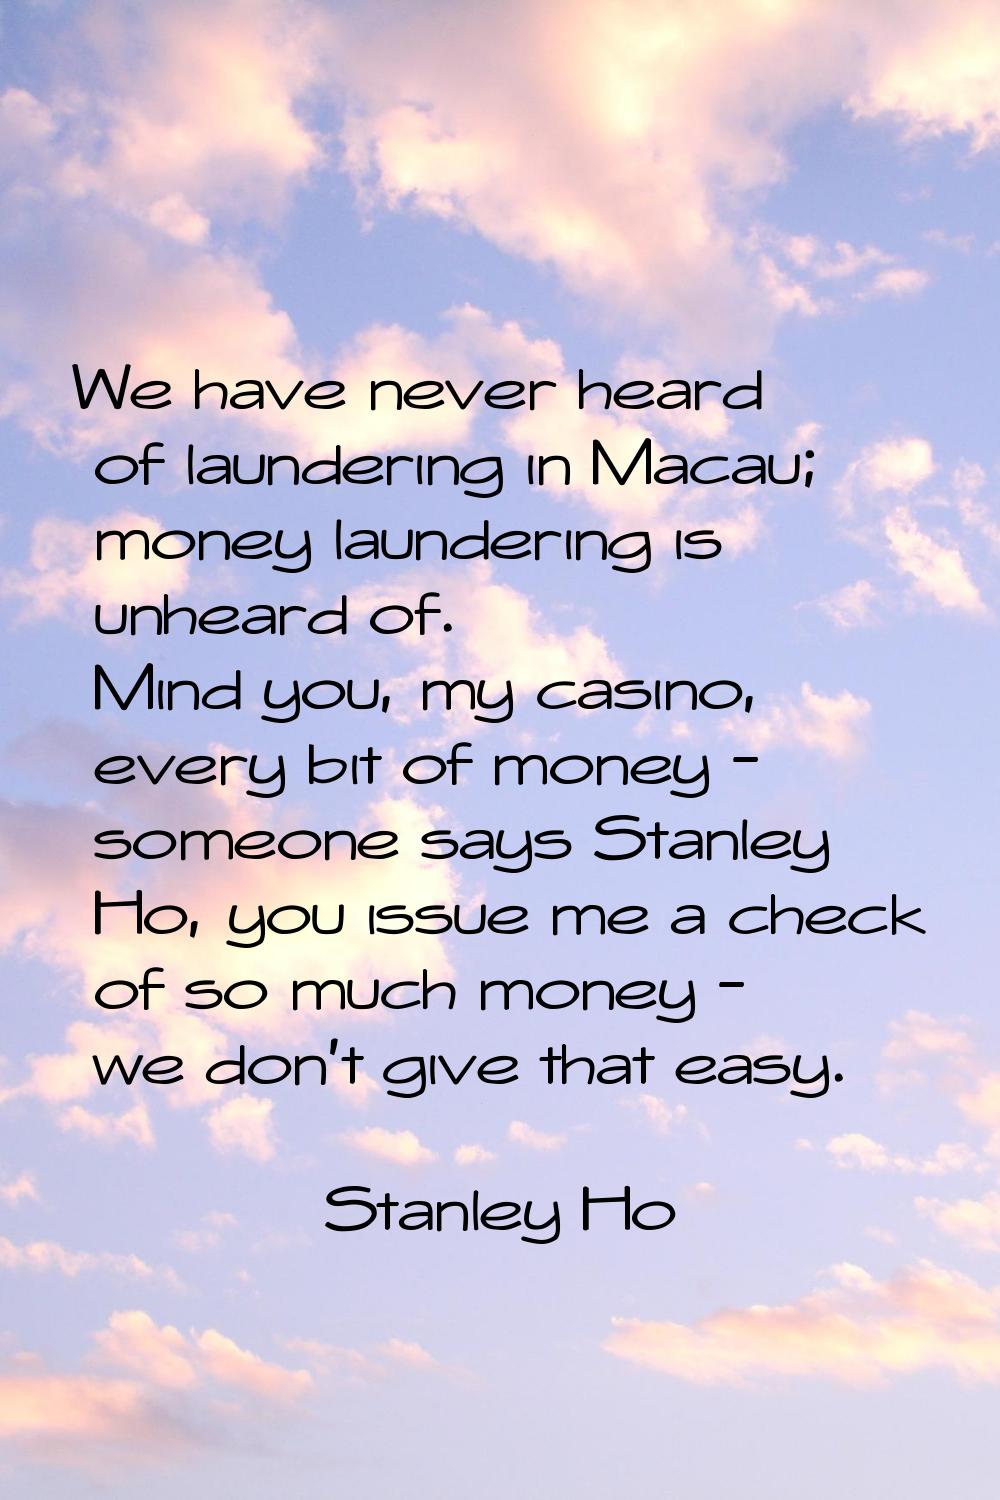 We have never heard of laundering in Macau; money laundering is unheard of. Mind you, my casino, ev